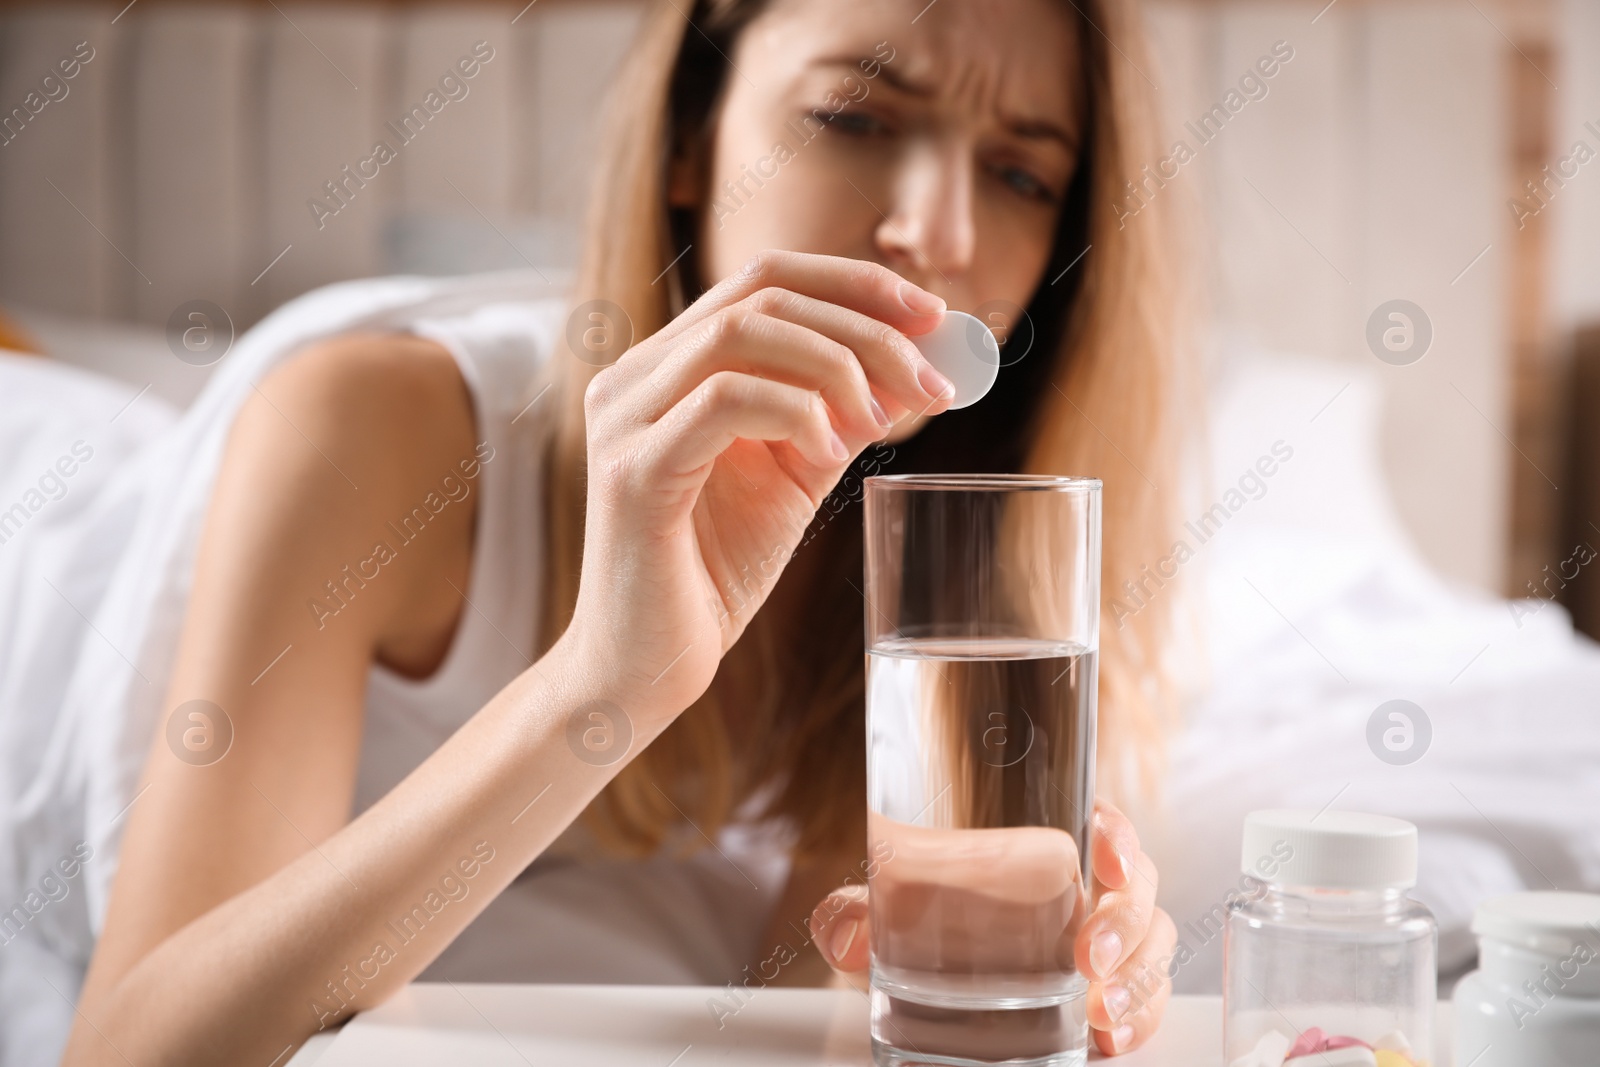 Photo of Woman putting medicine for hangover into glass of water at home, focus on hand with pill